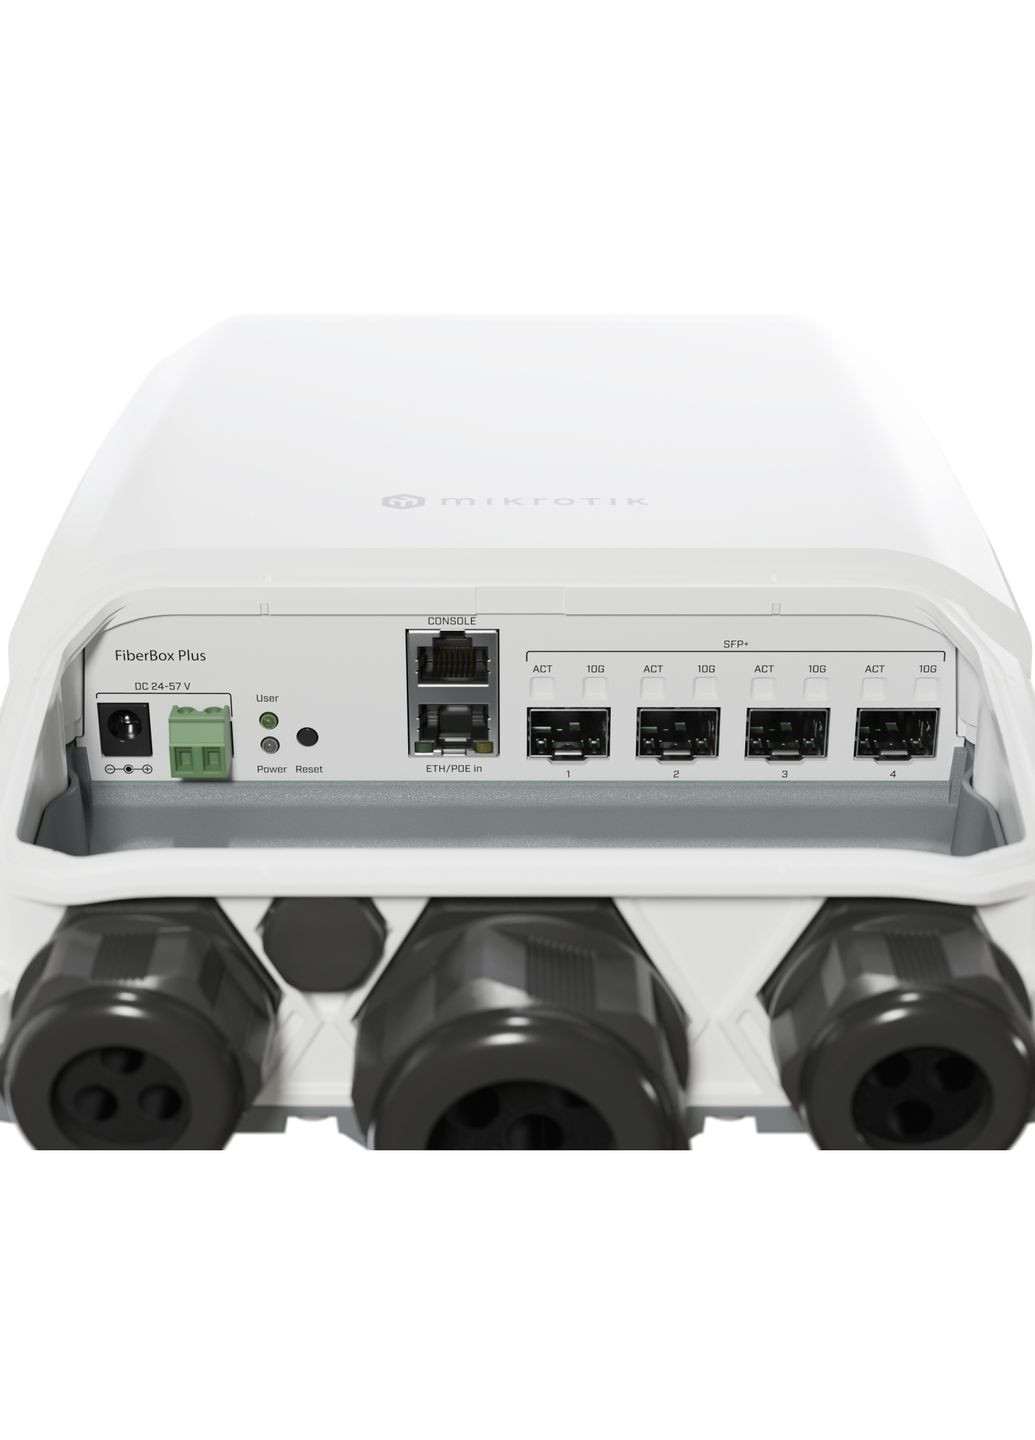 Комутатор мережевий CRS3051G-4S+OUT Mikrotik crs305-1g-4s+out (268146330)